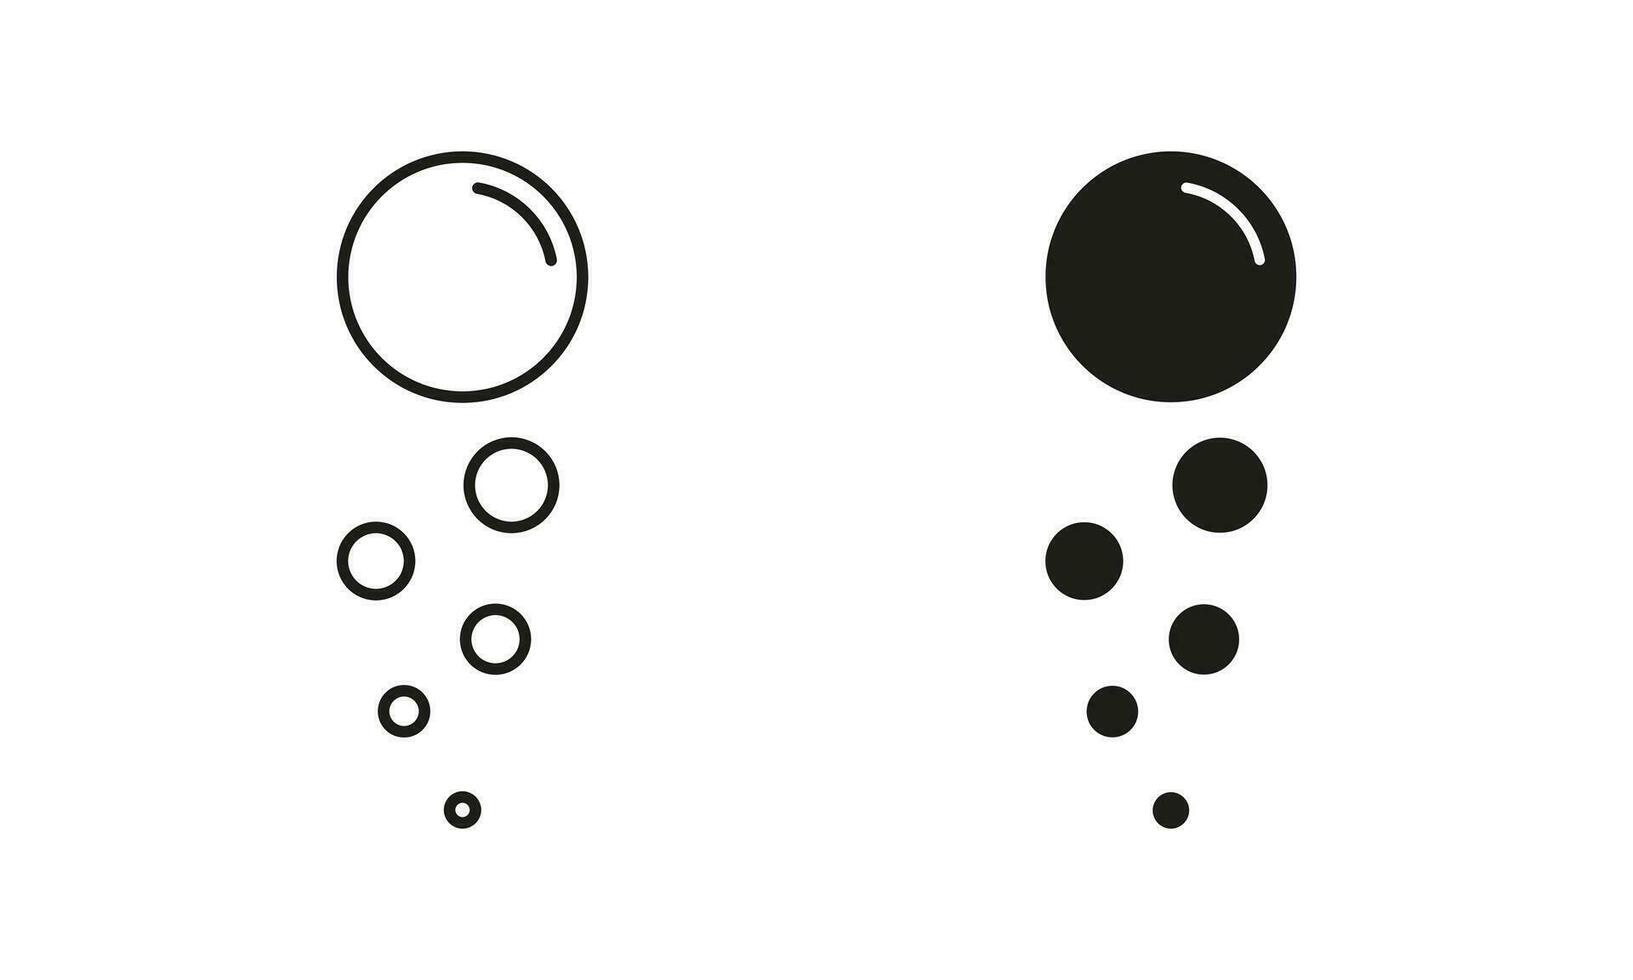 Foam, Air Oxygen Line and Silhouette Black Icon Set. Sphere Bubble Soap, Champagne Drops Pictogram. Underwater Ball. Clean Water. Soda Symbol Collection. Isolated Vector Illustration.